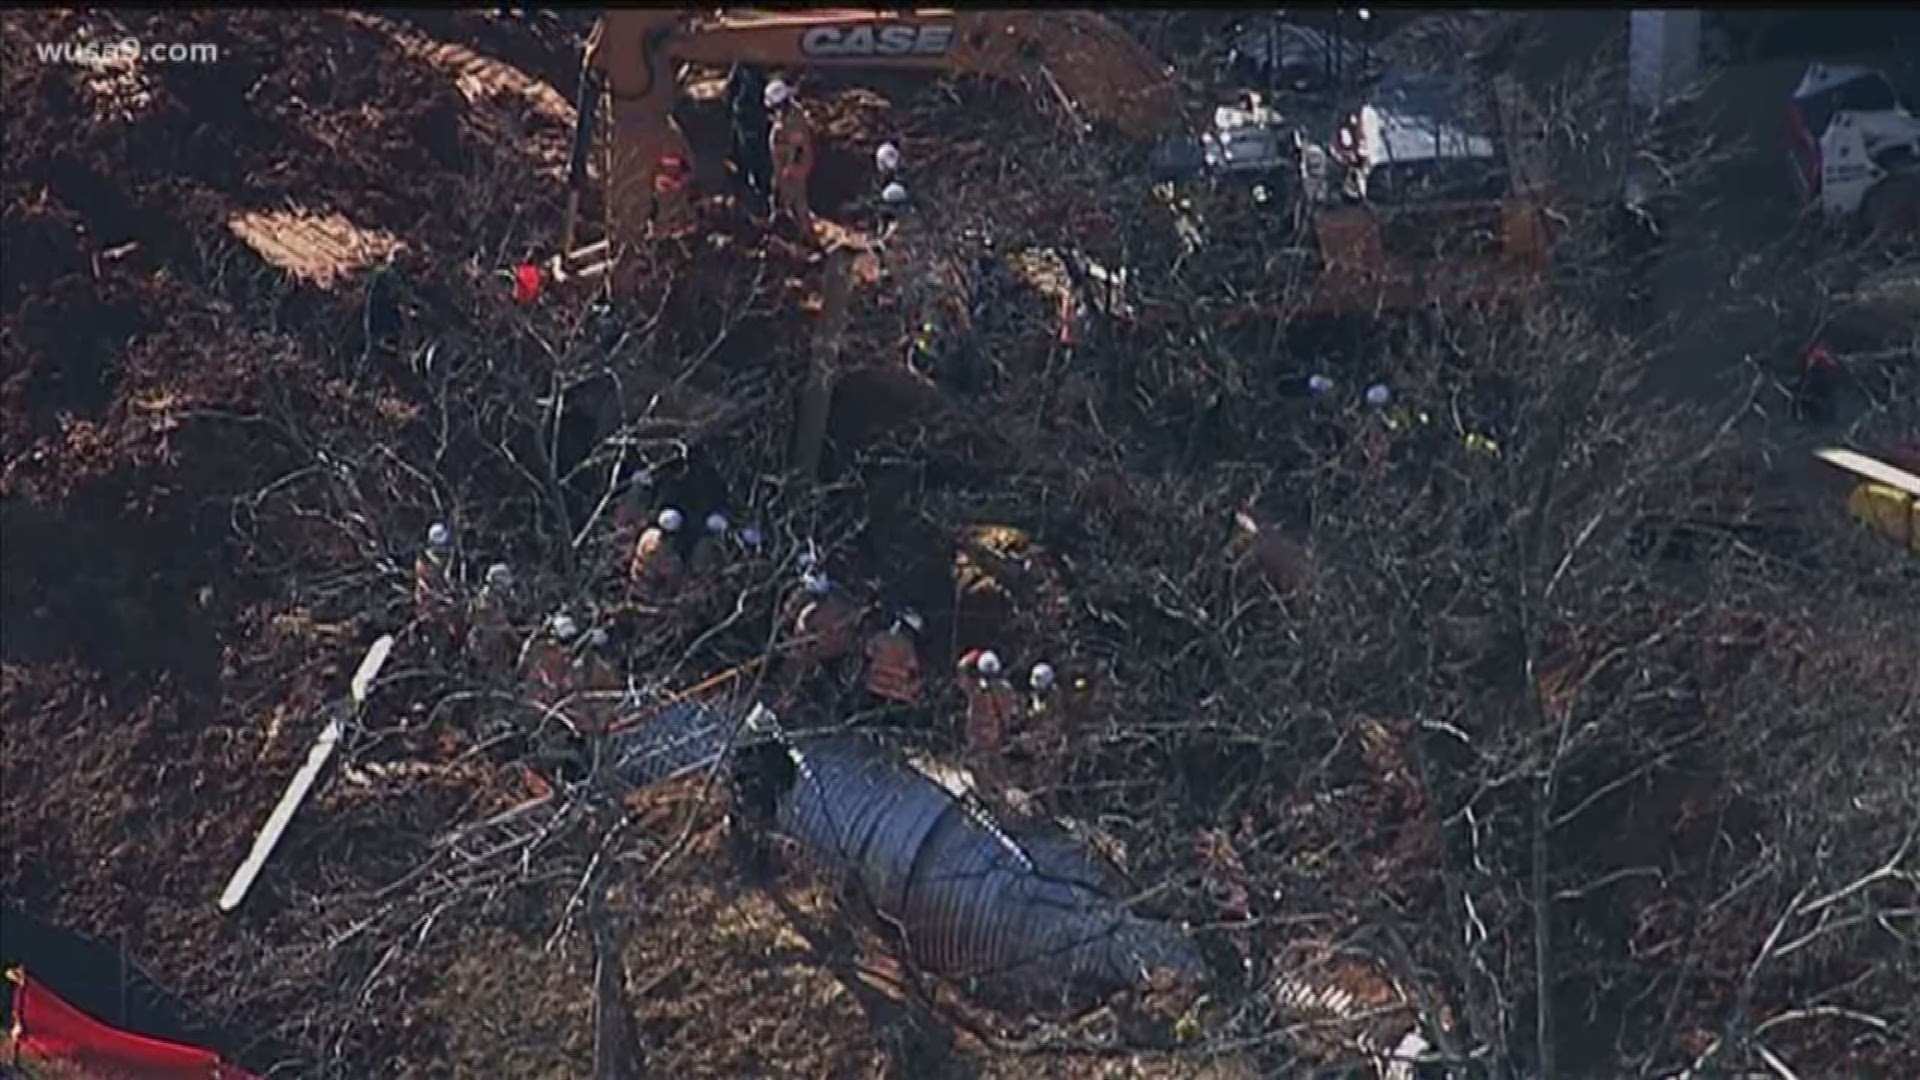 The man was trapped up to his chest in the trench, officials say.